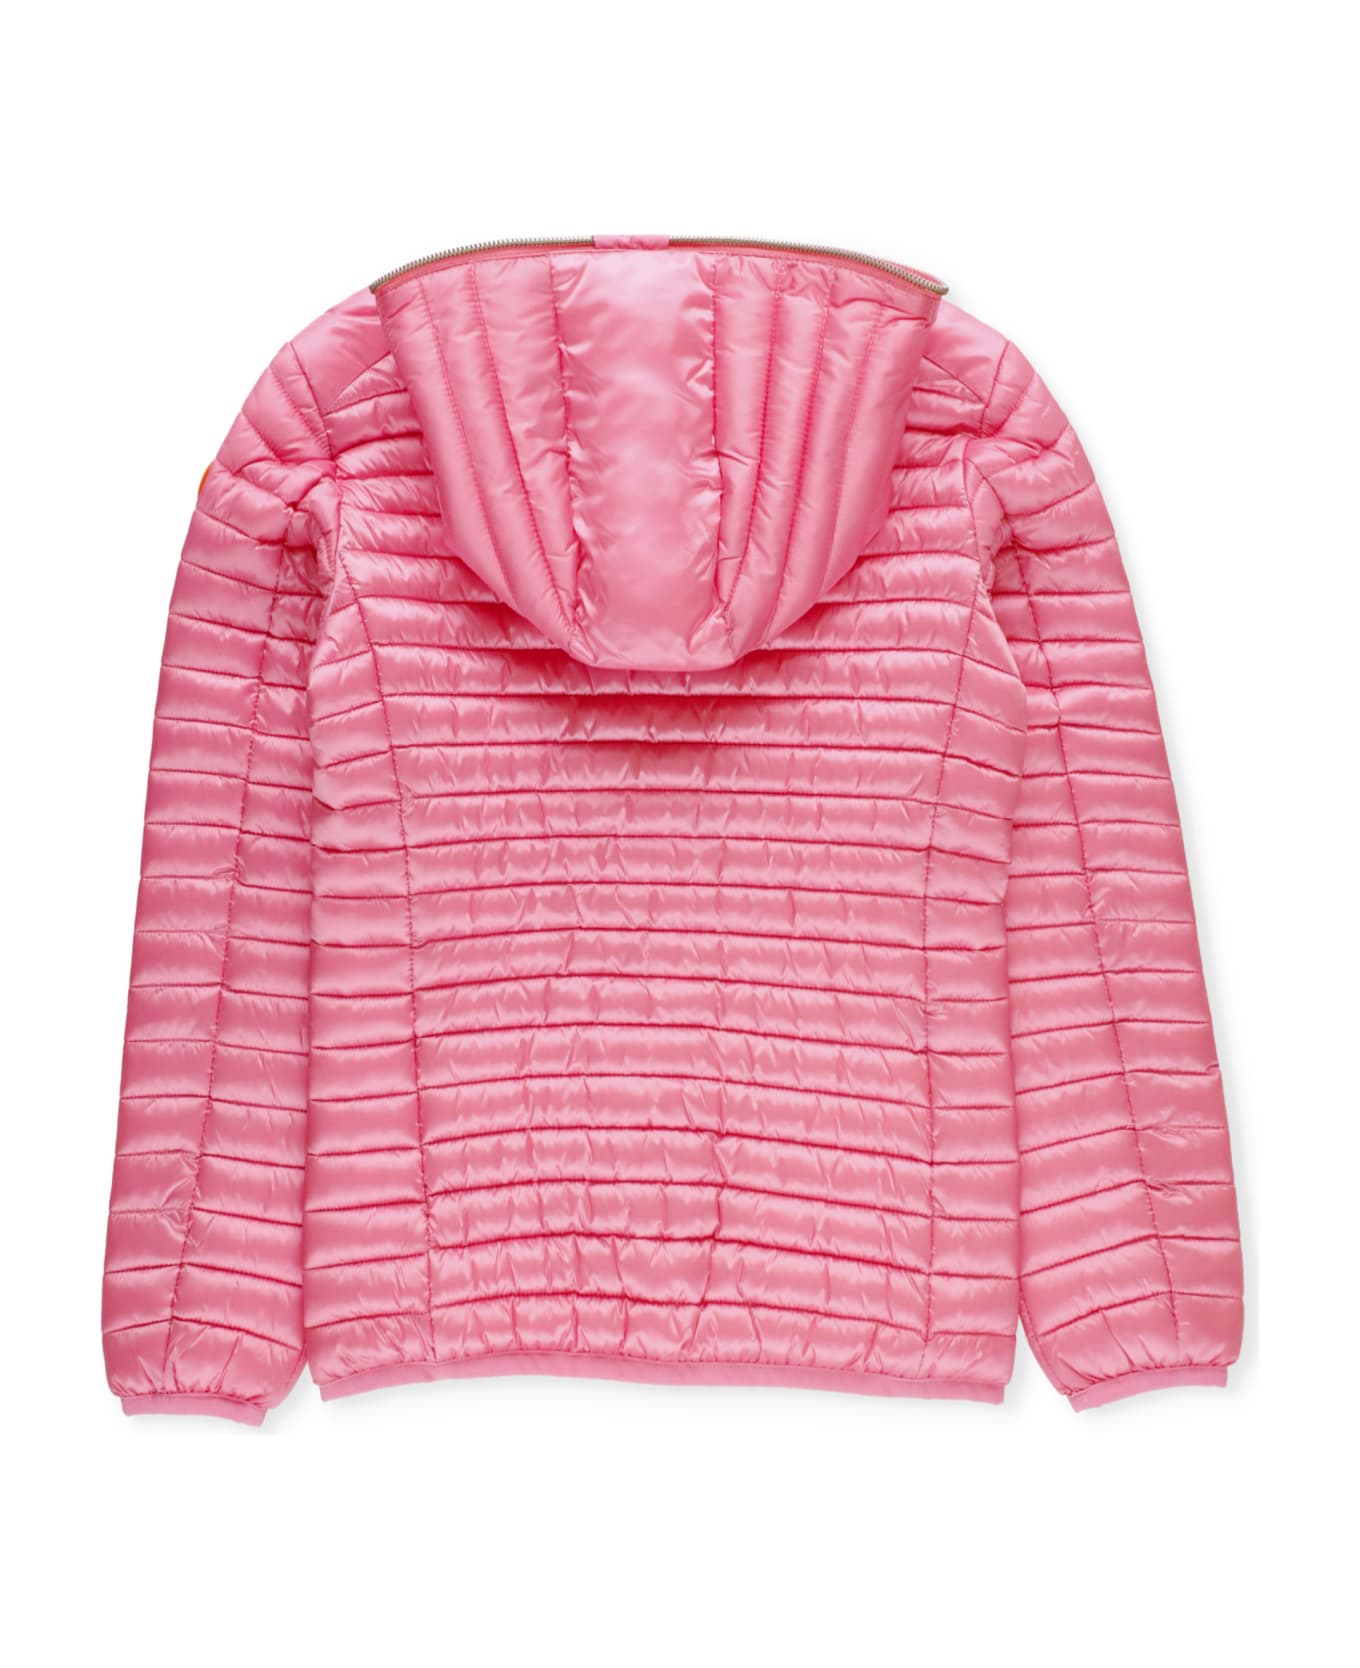 Save the Duck Rosy Jacket - Pink